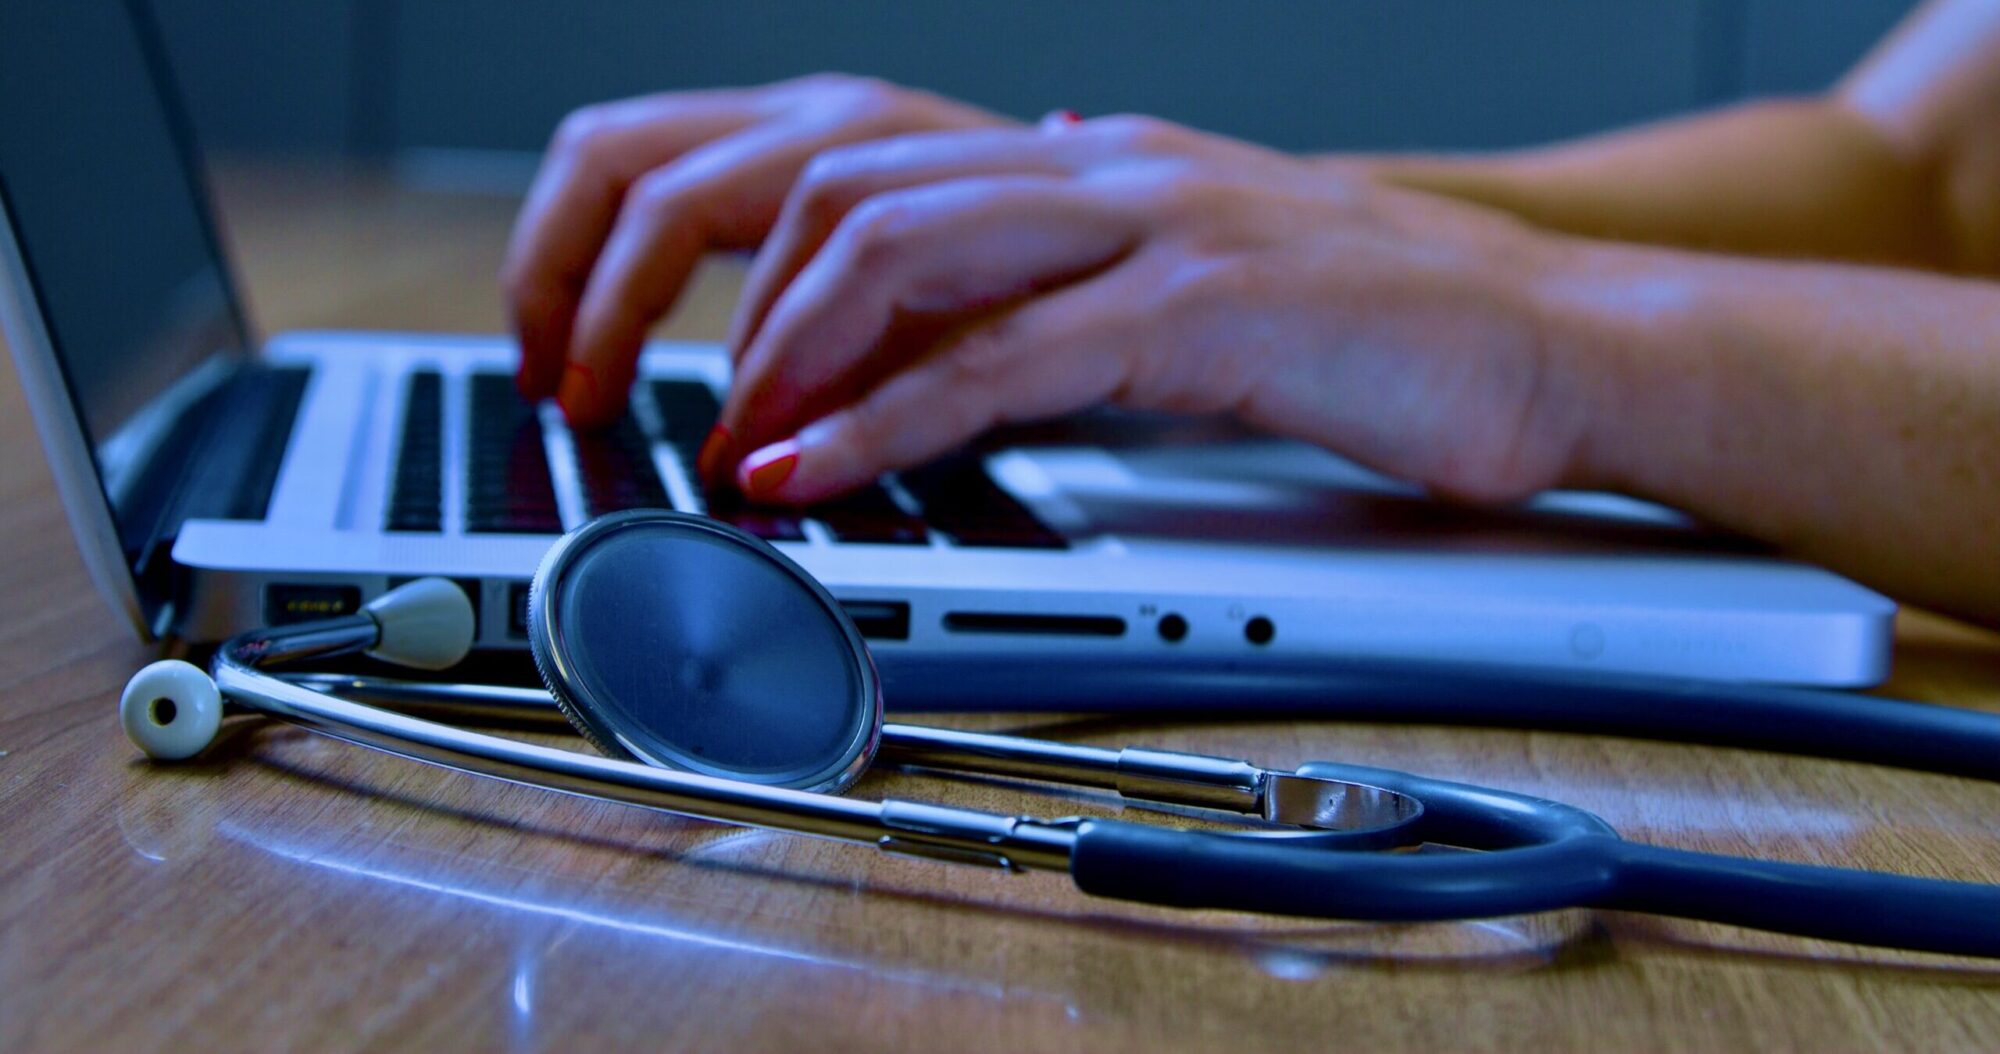 Women's hands typing on laptop with stethoscope in foreground